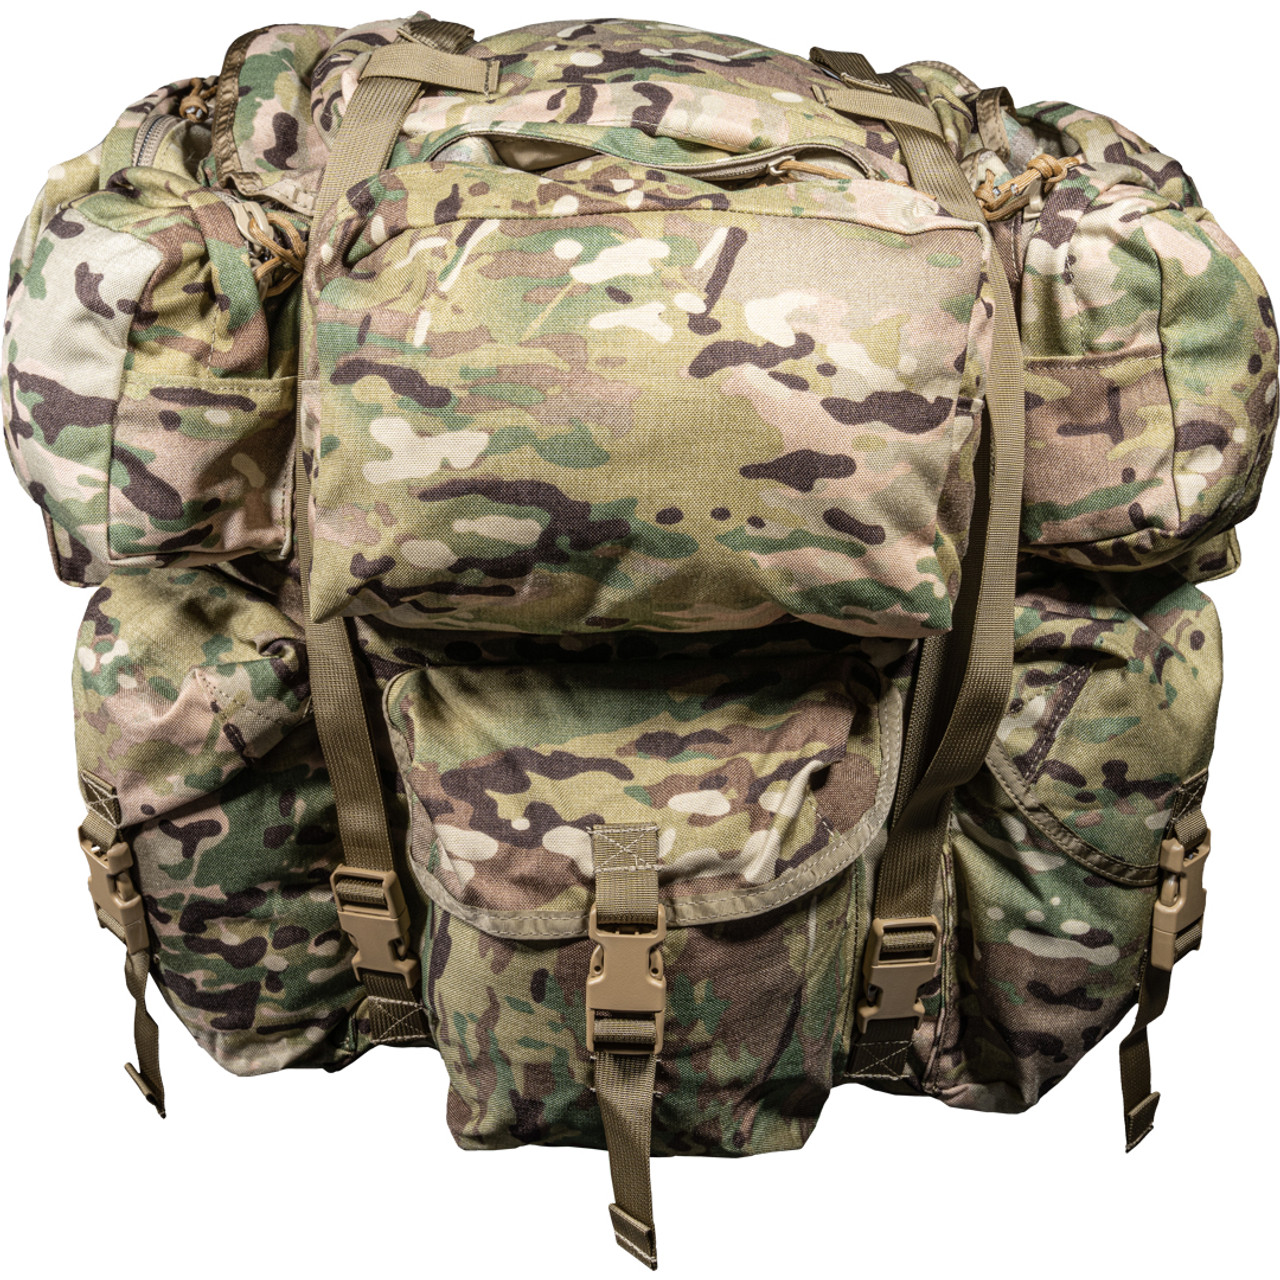 21 Get Home Bag Essentials to Pack Today - TACTICAL